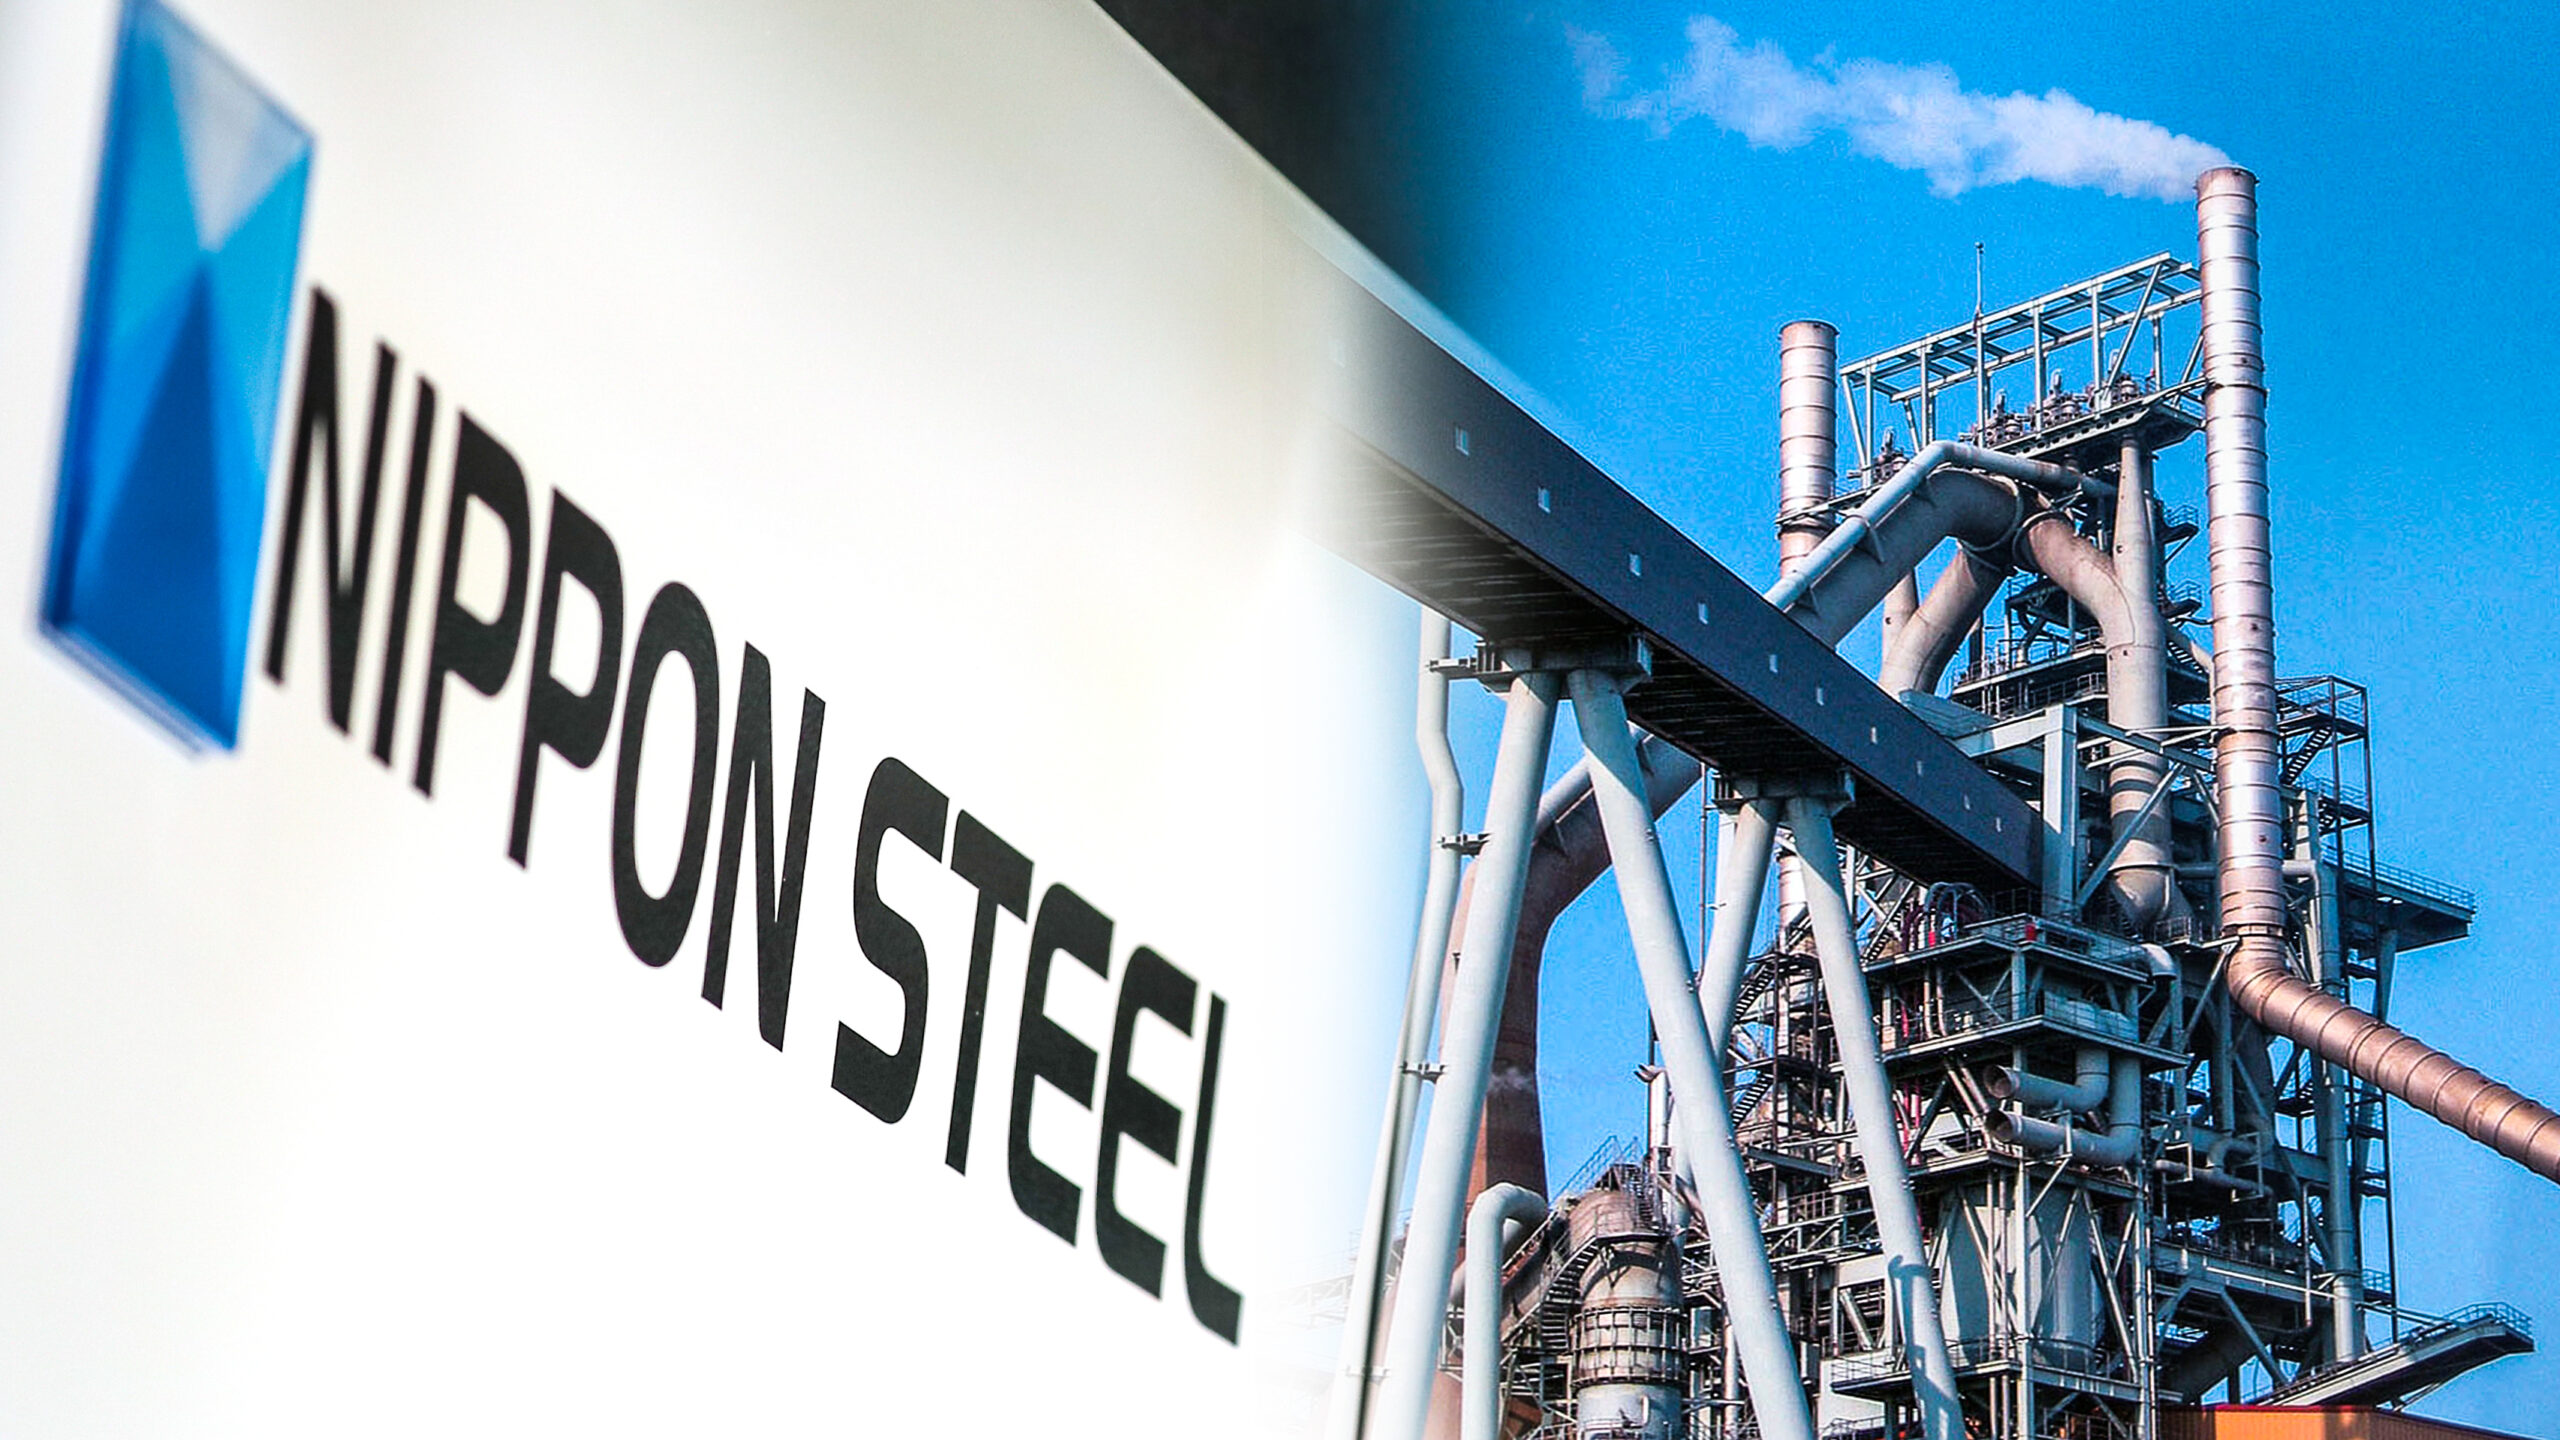 Nippon Steel invests US$71.3 million to set up plant in Guanajuato